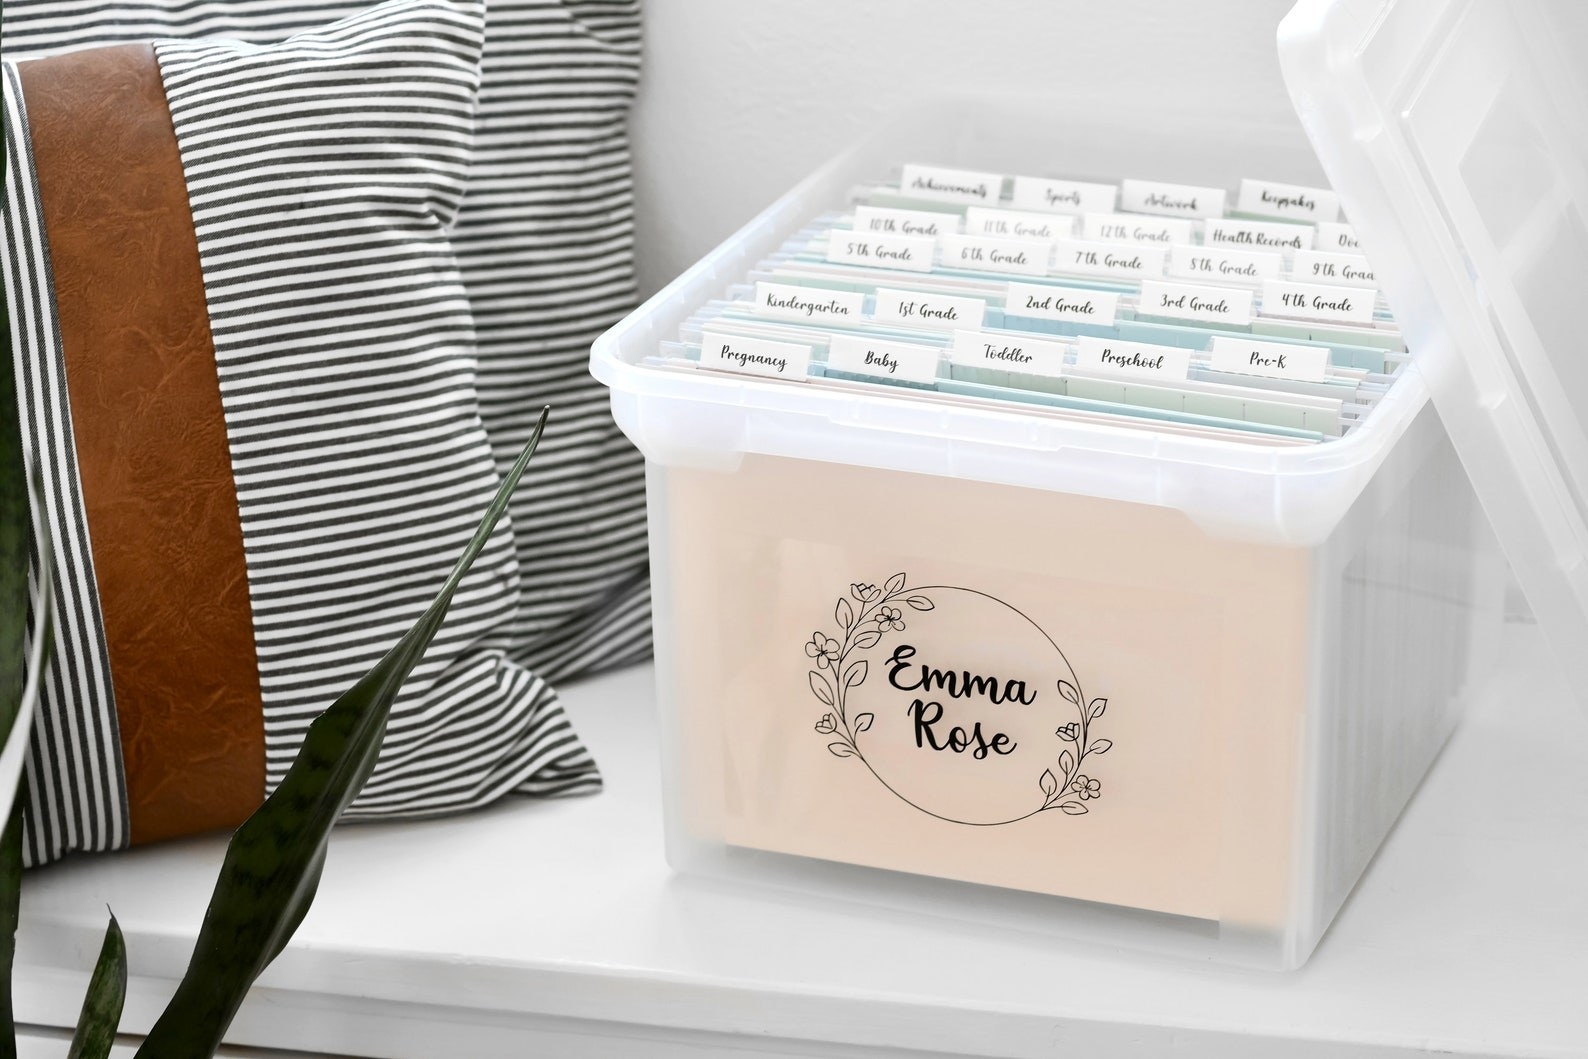 storage box with labeled files to hold kids&#x27; work